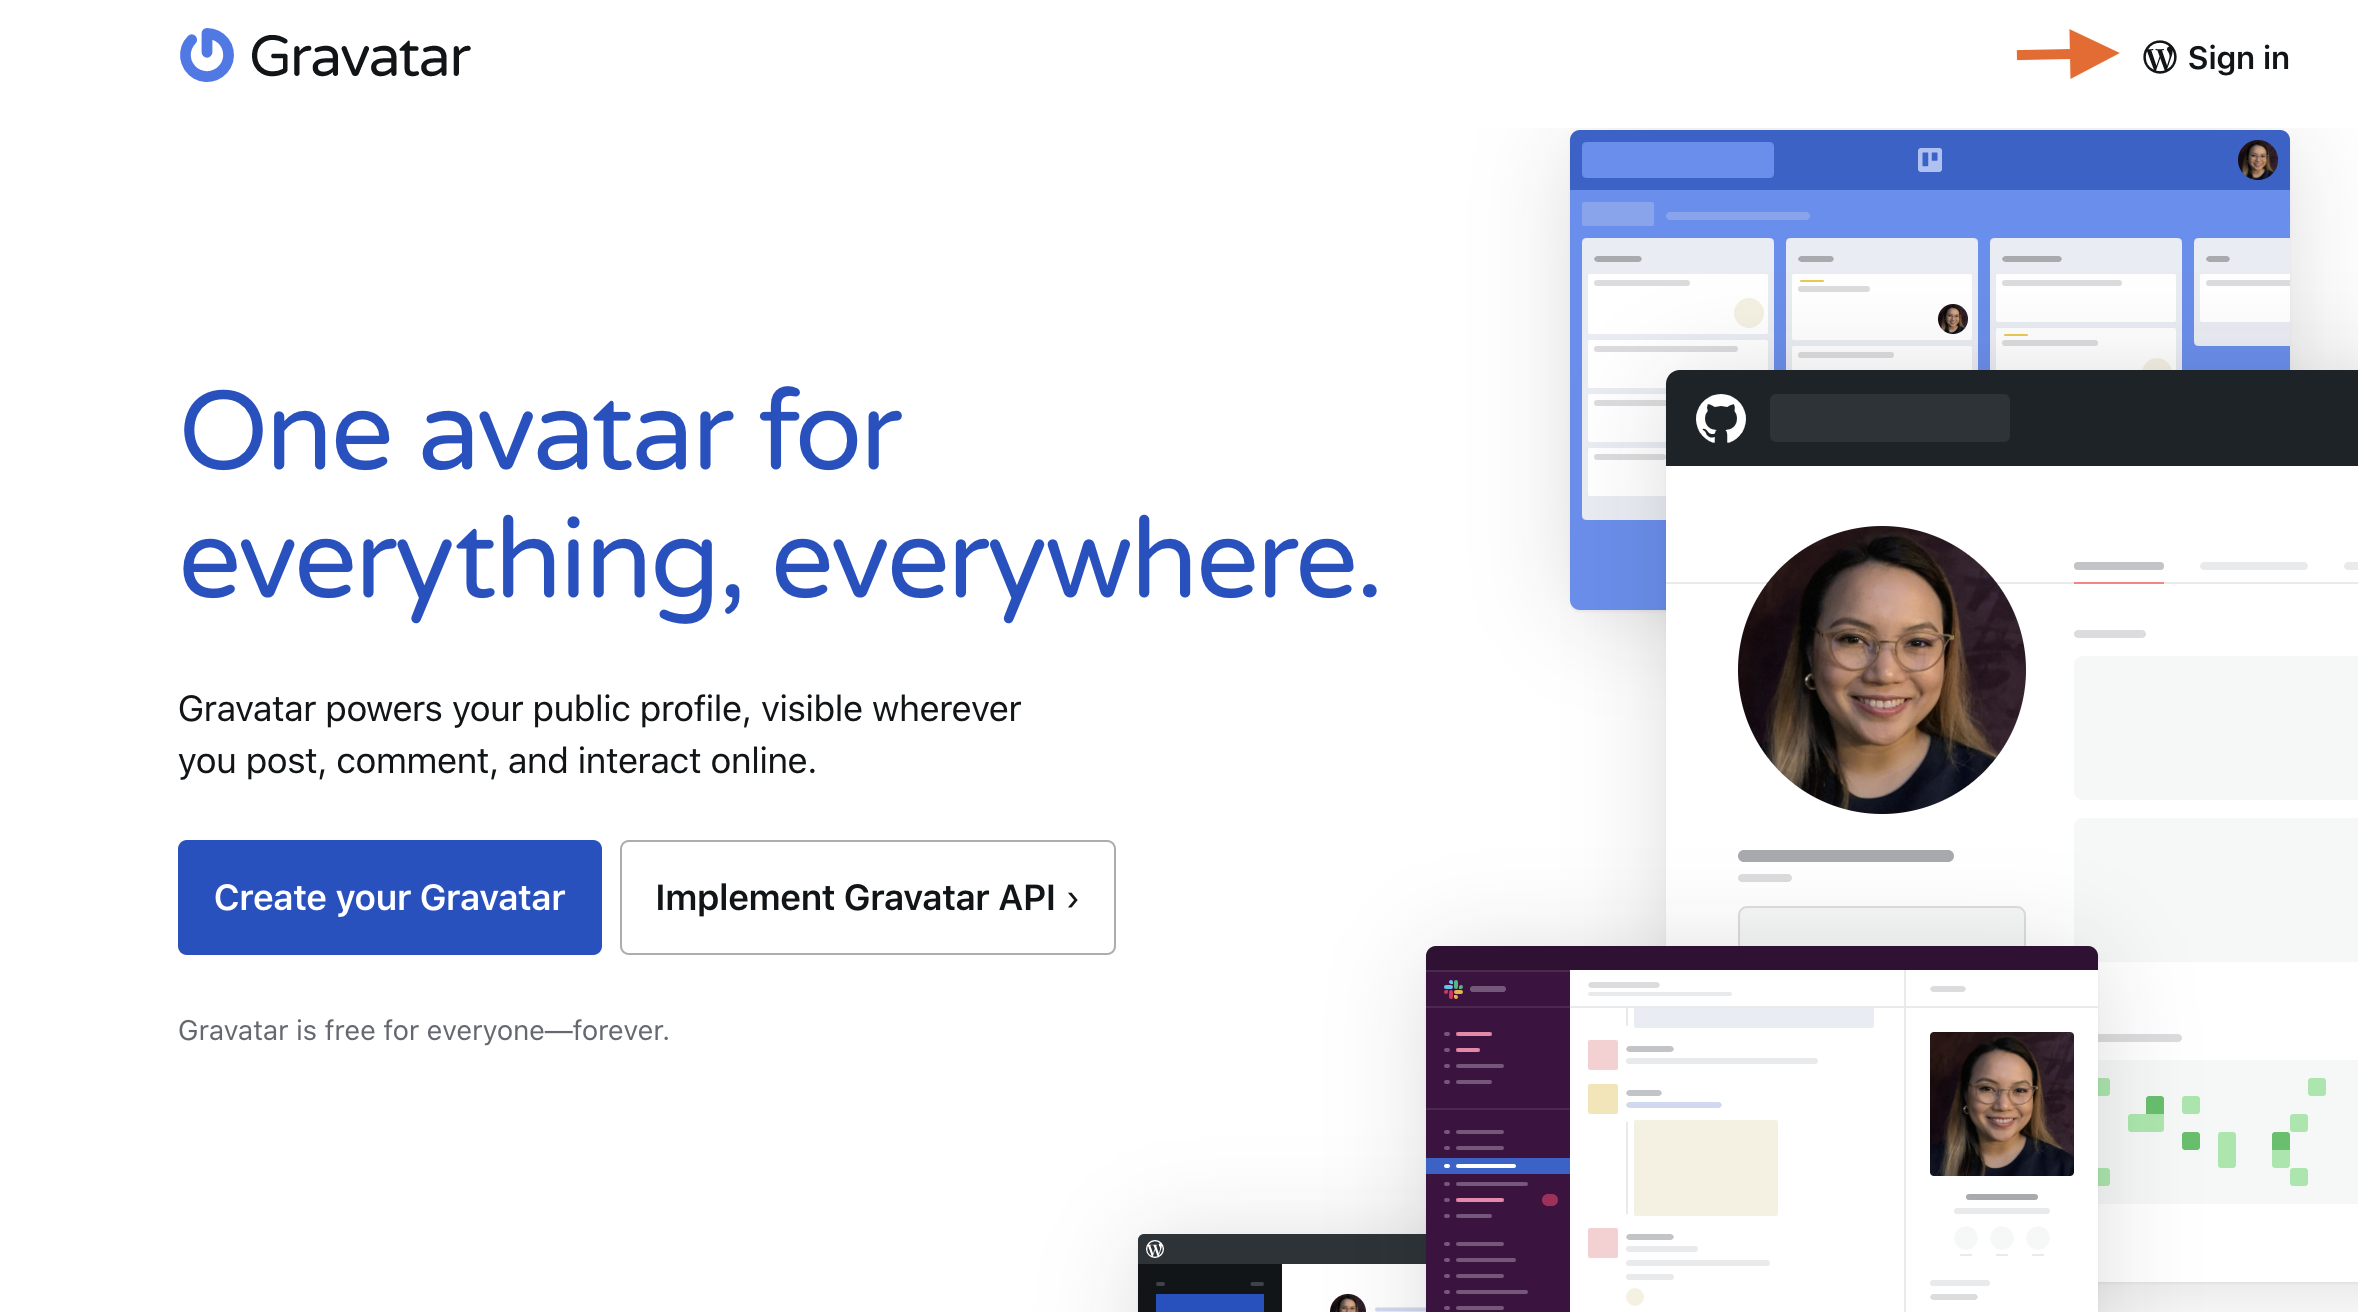 Gravatar homepage with arrow pointing to Sign In button.